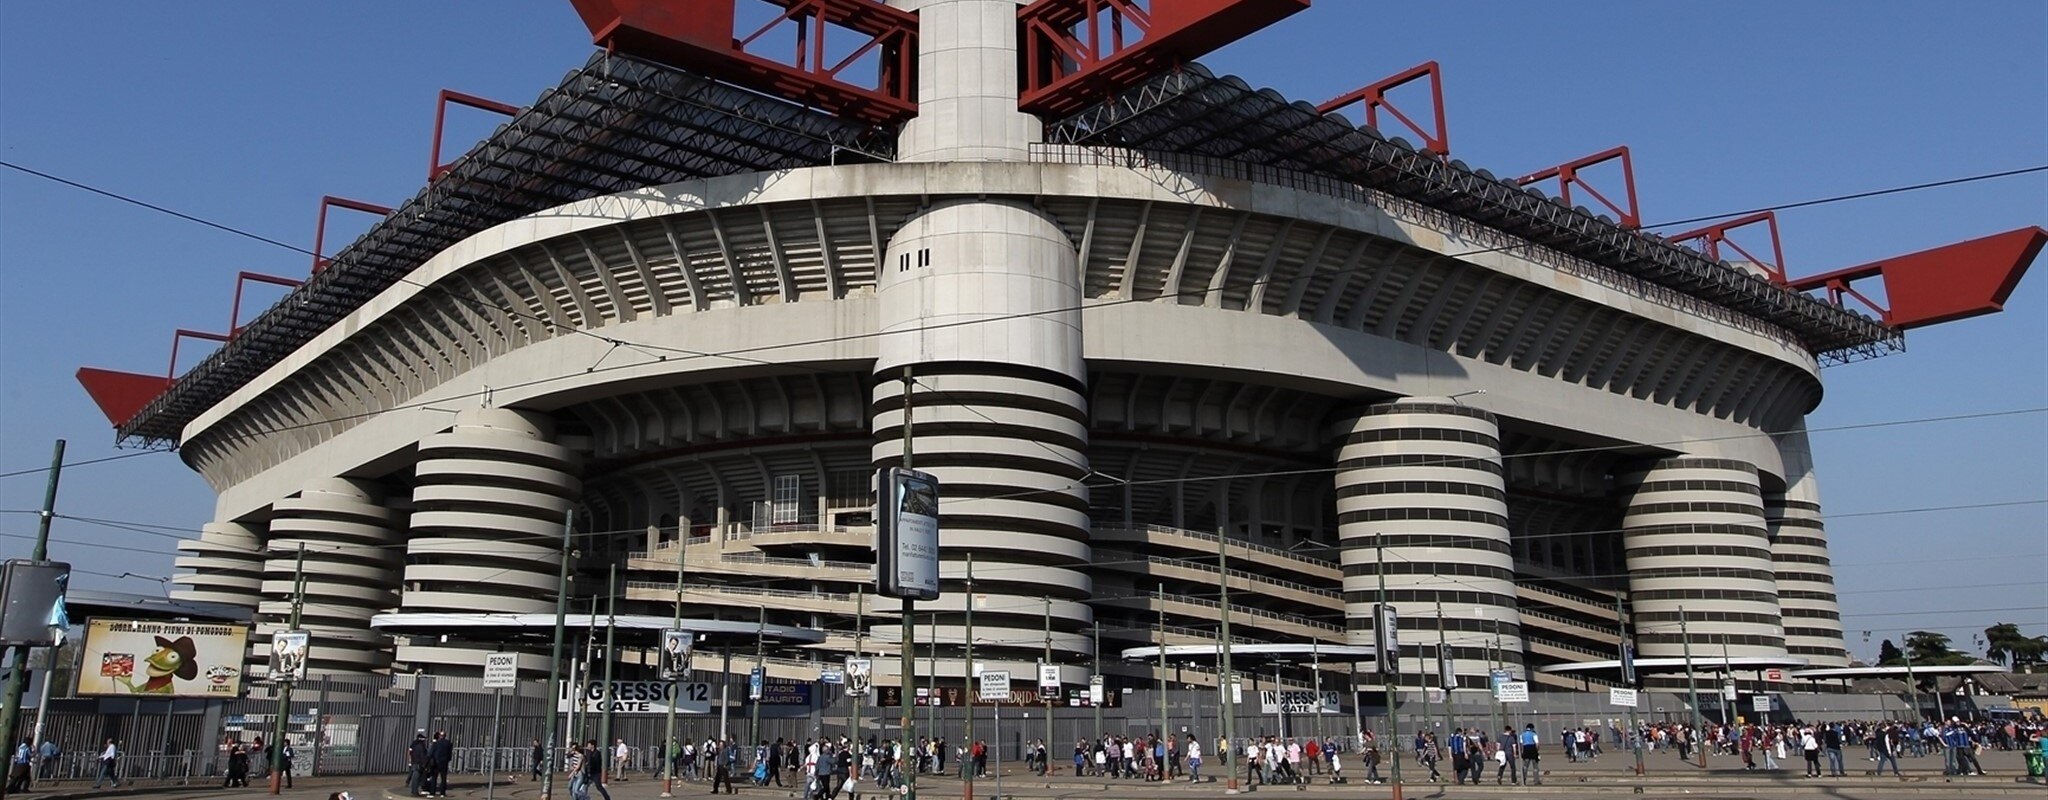 Tickets go on sale for UEFA Champions League final in Milan